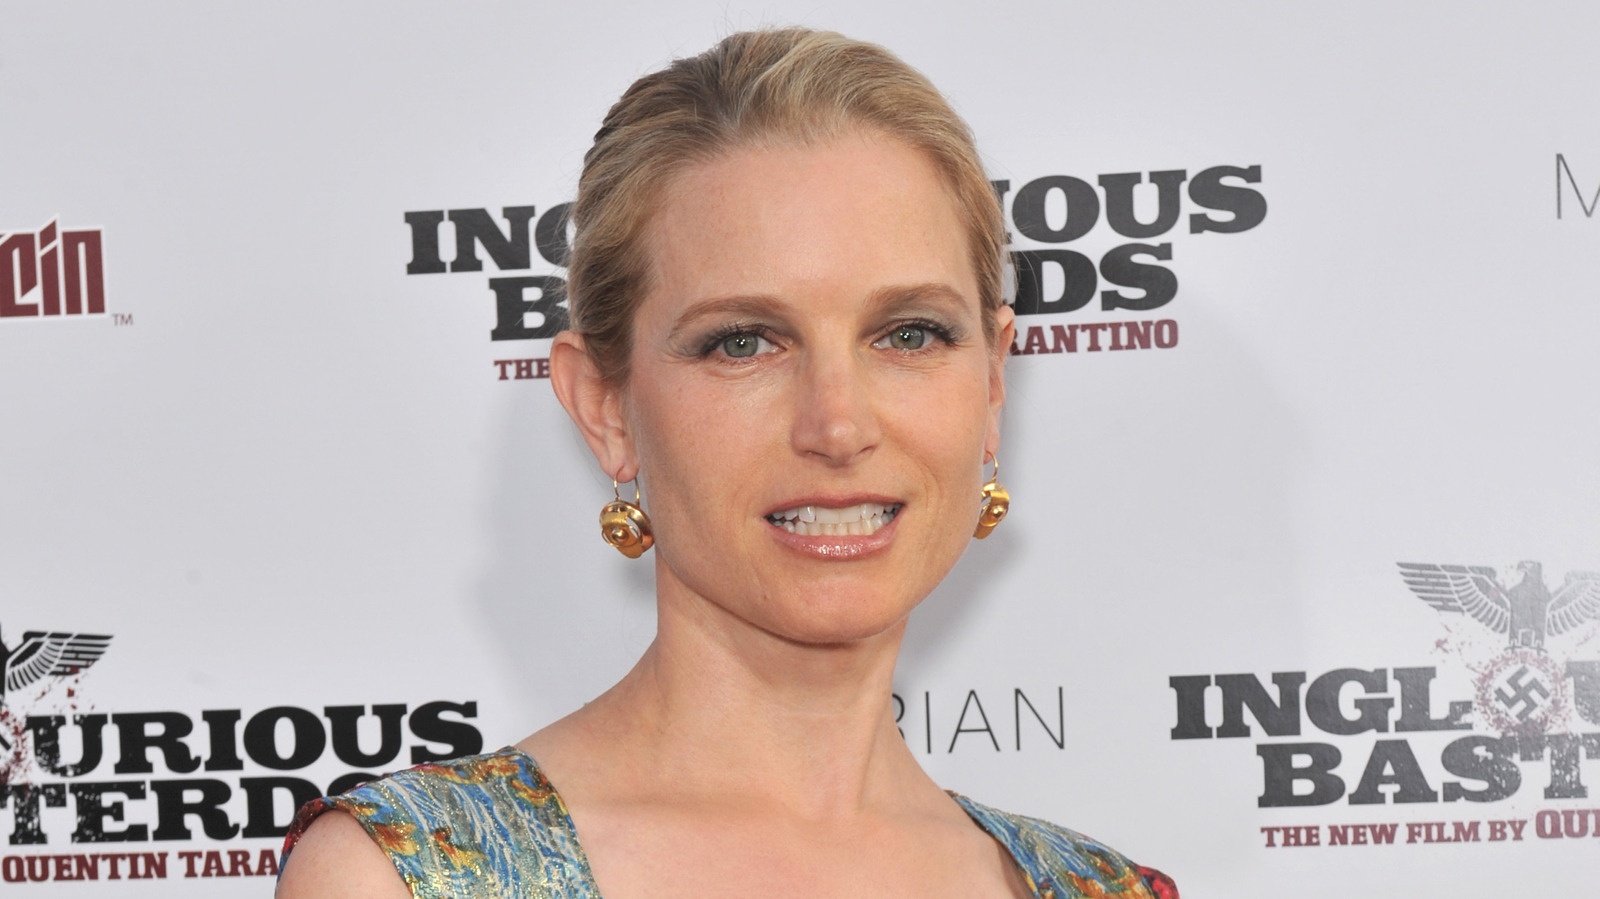 Bridget Fonda Explains Why She'll Never Return to Acting in Rare Appearance